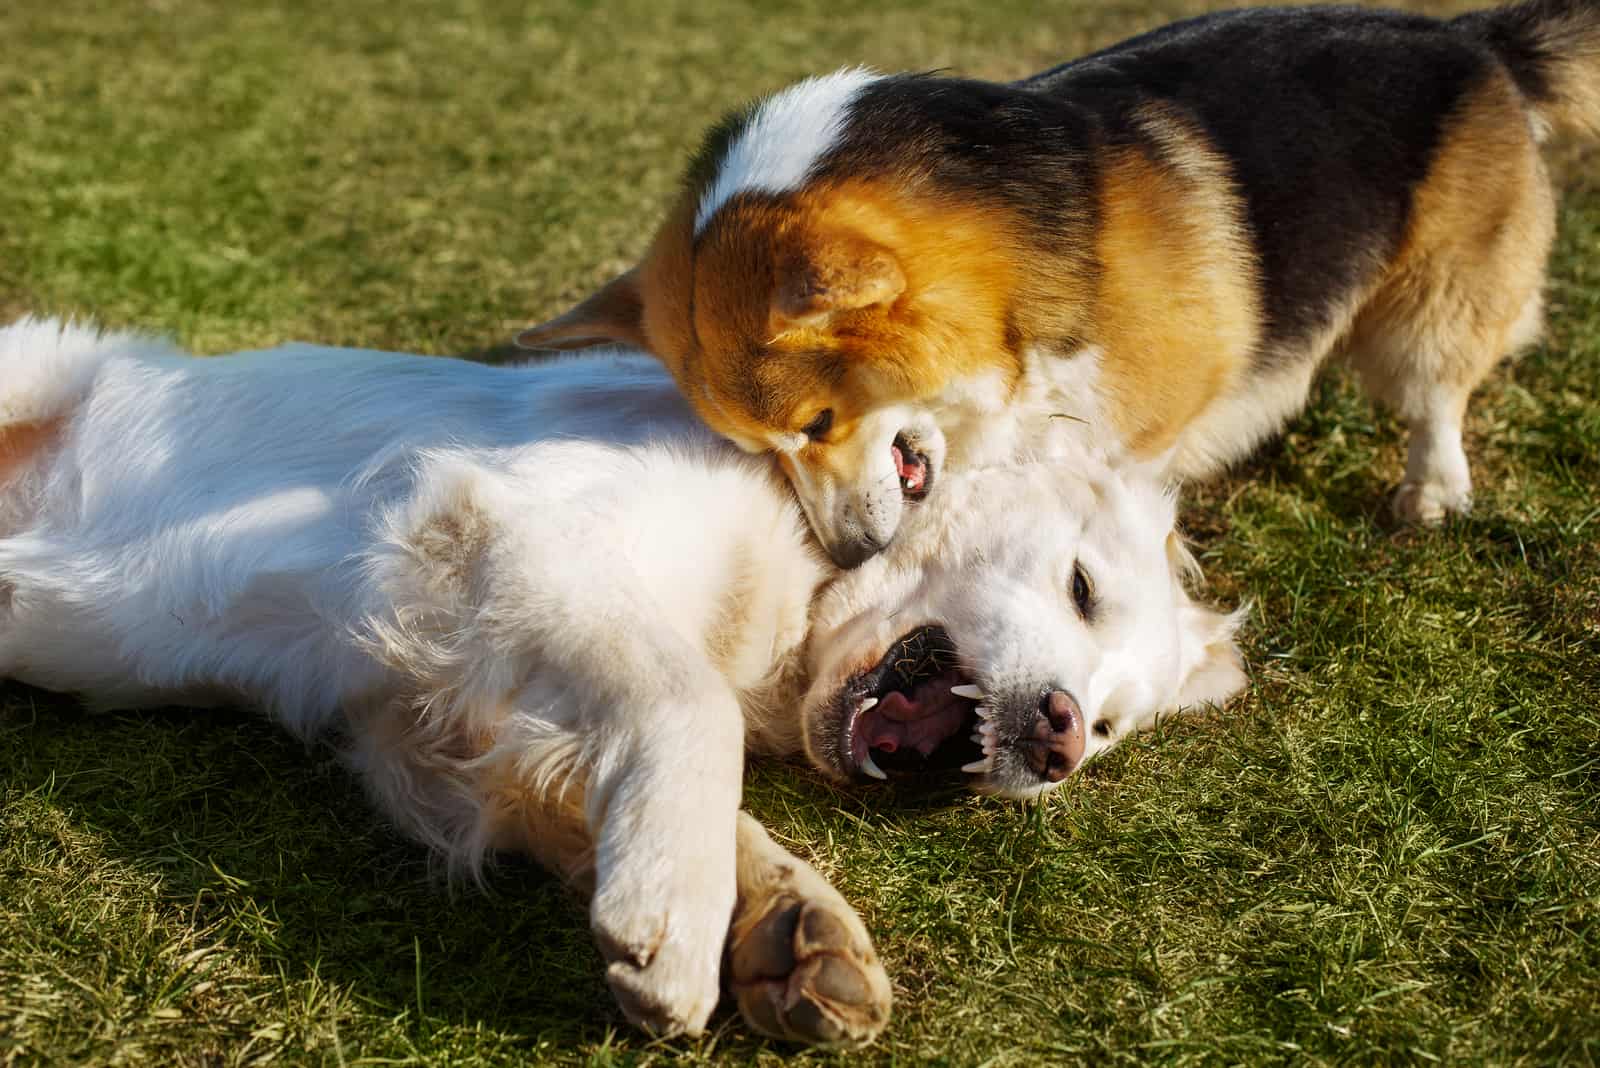 Golden Retriever playing with another dog on grass